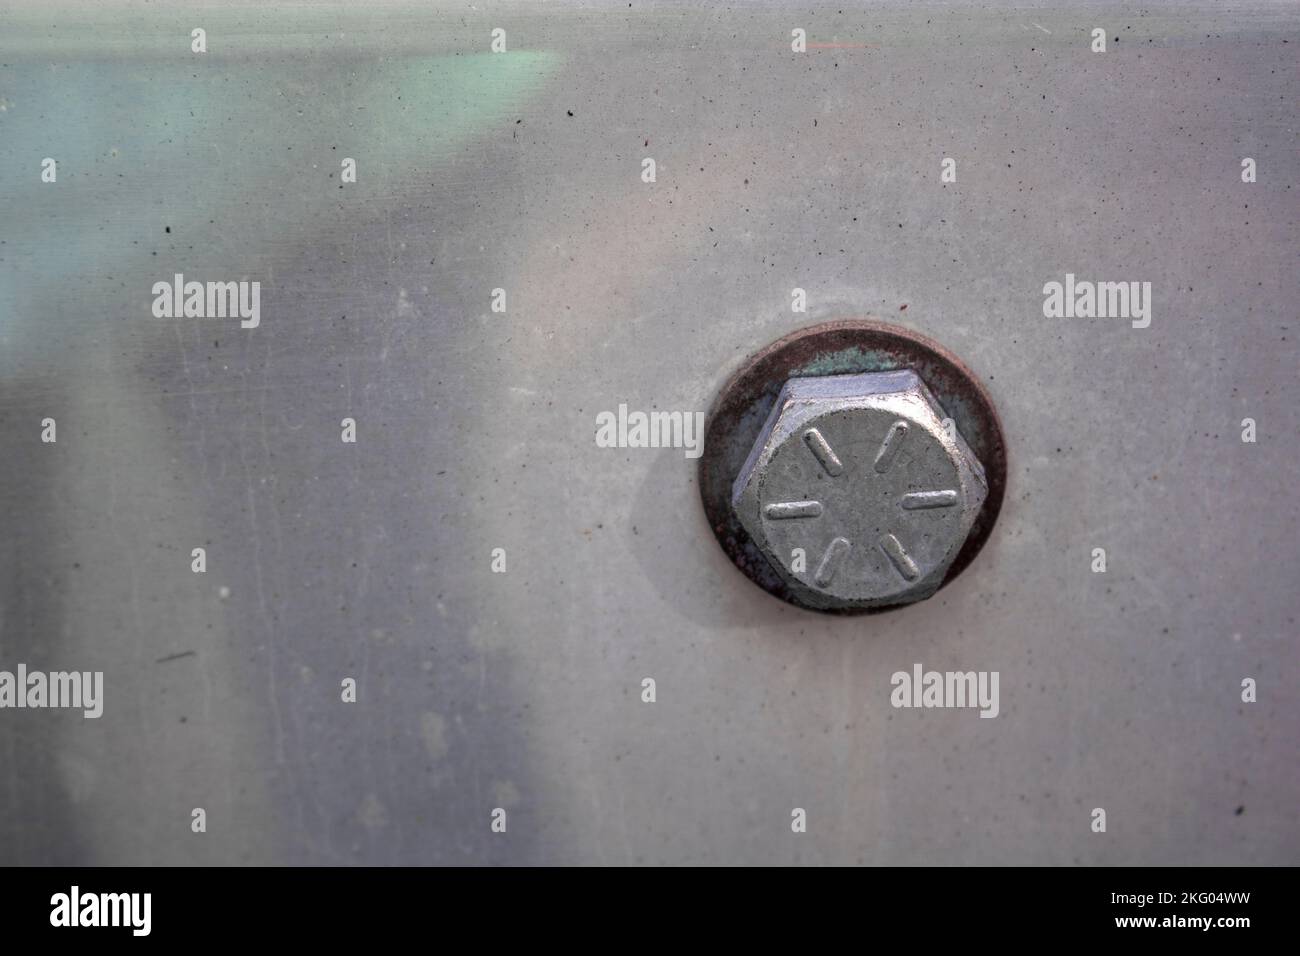 The Head of a bolt bolted on a steel metal plate with a washer in between Stock Photo